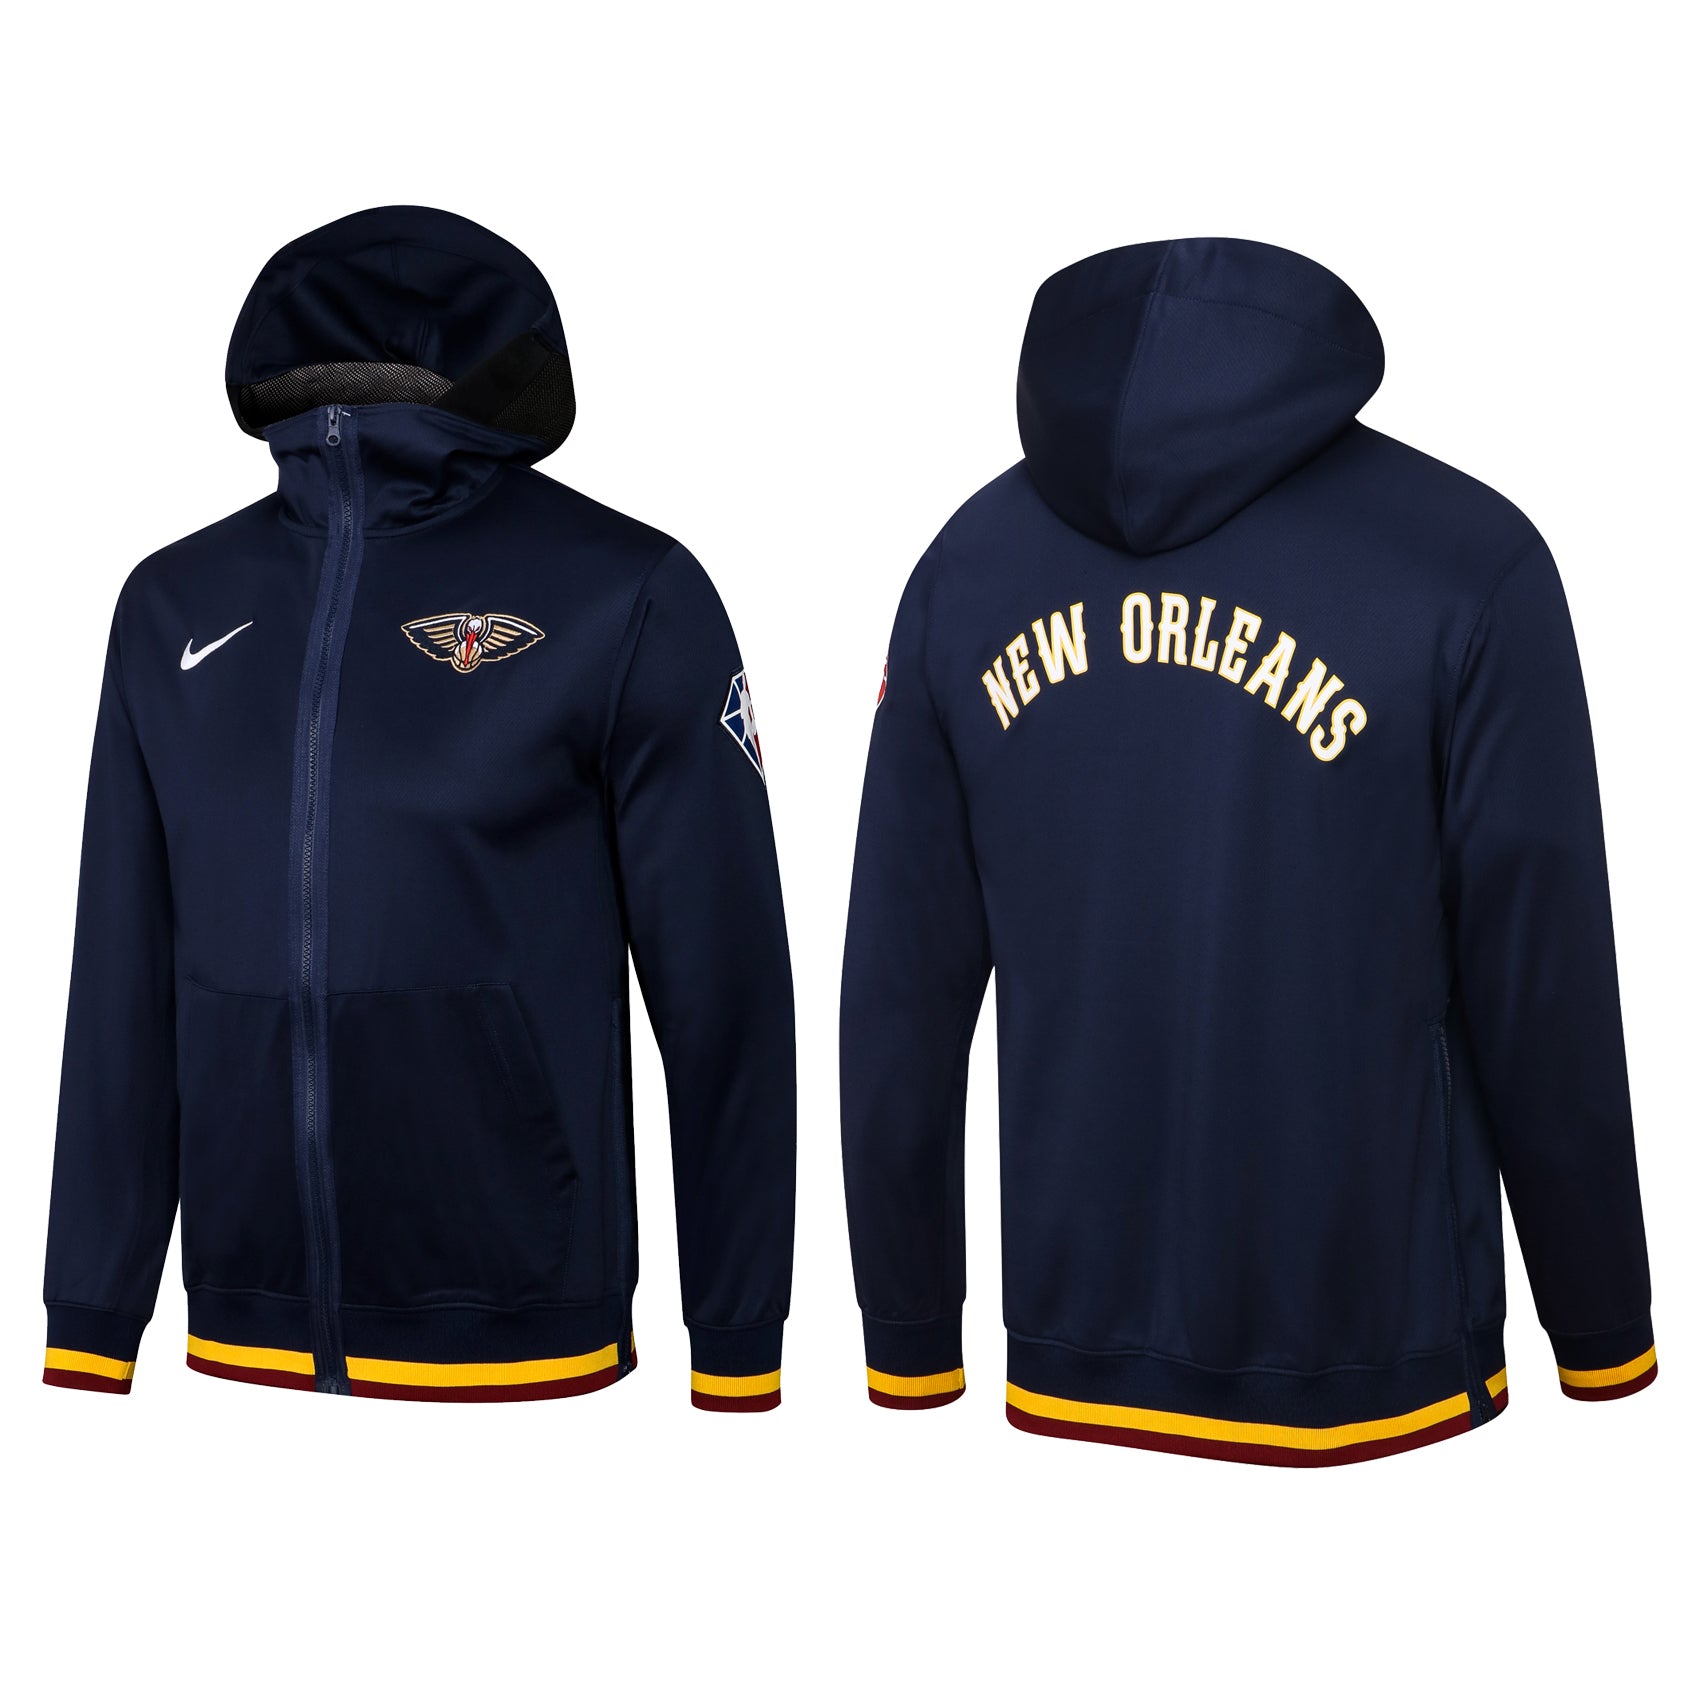 New orleans navy blue/yellow jacket